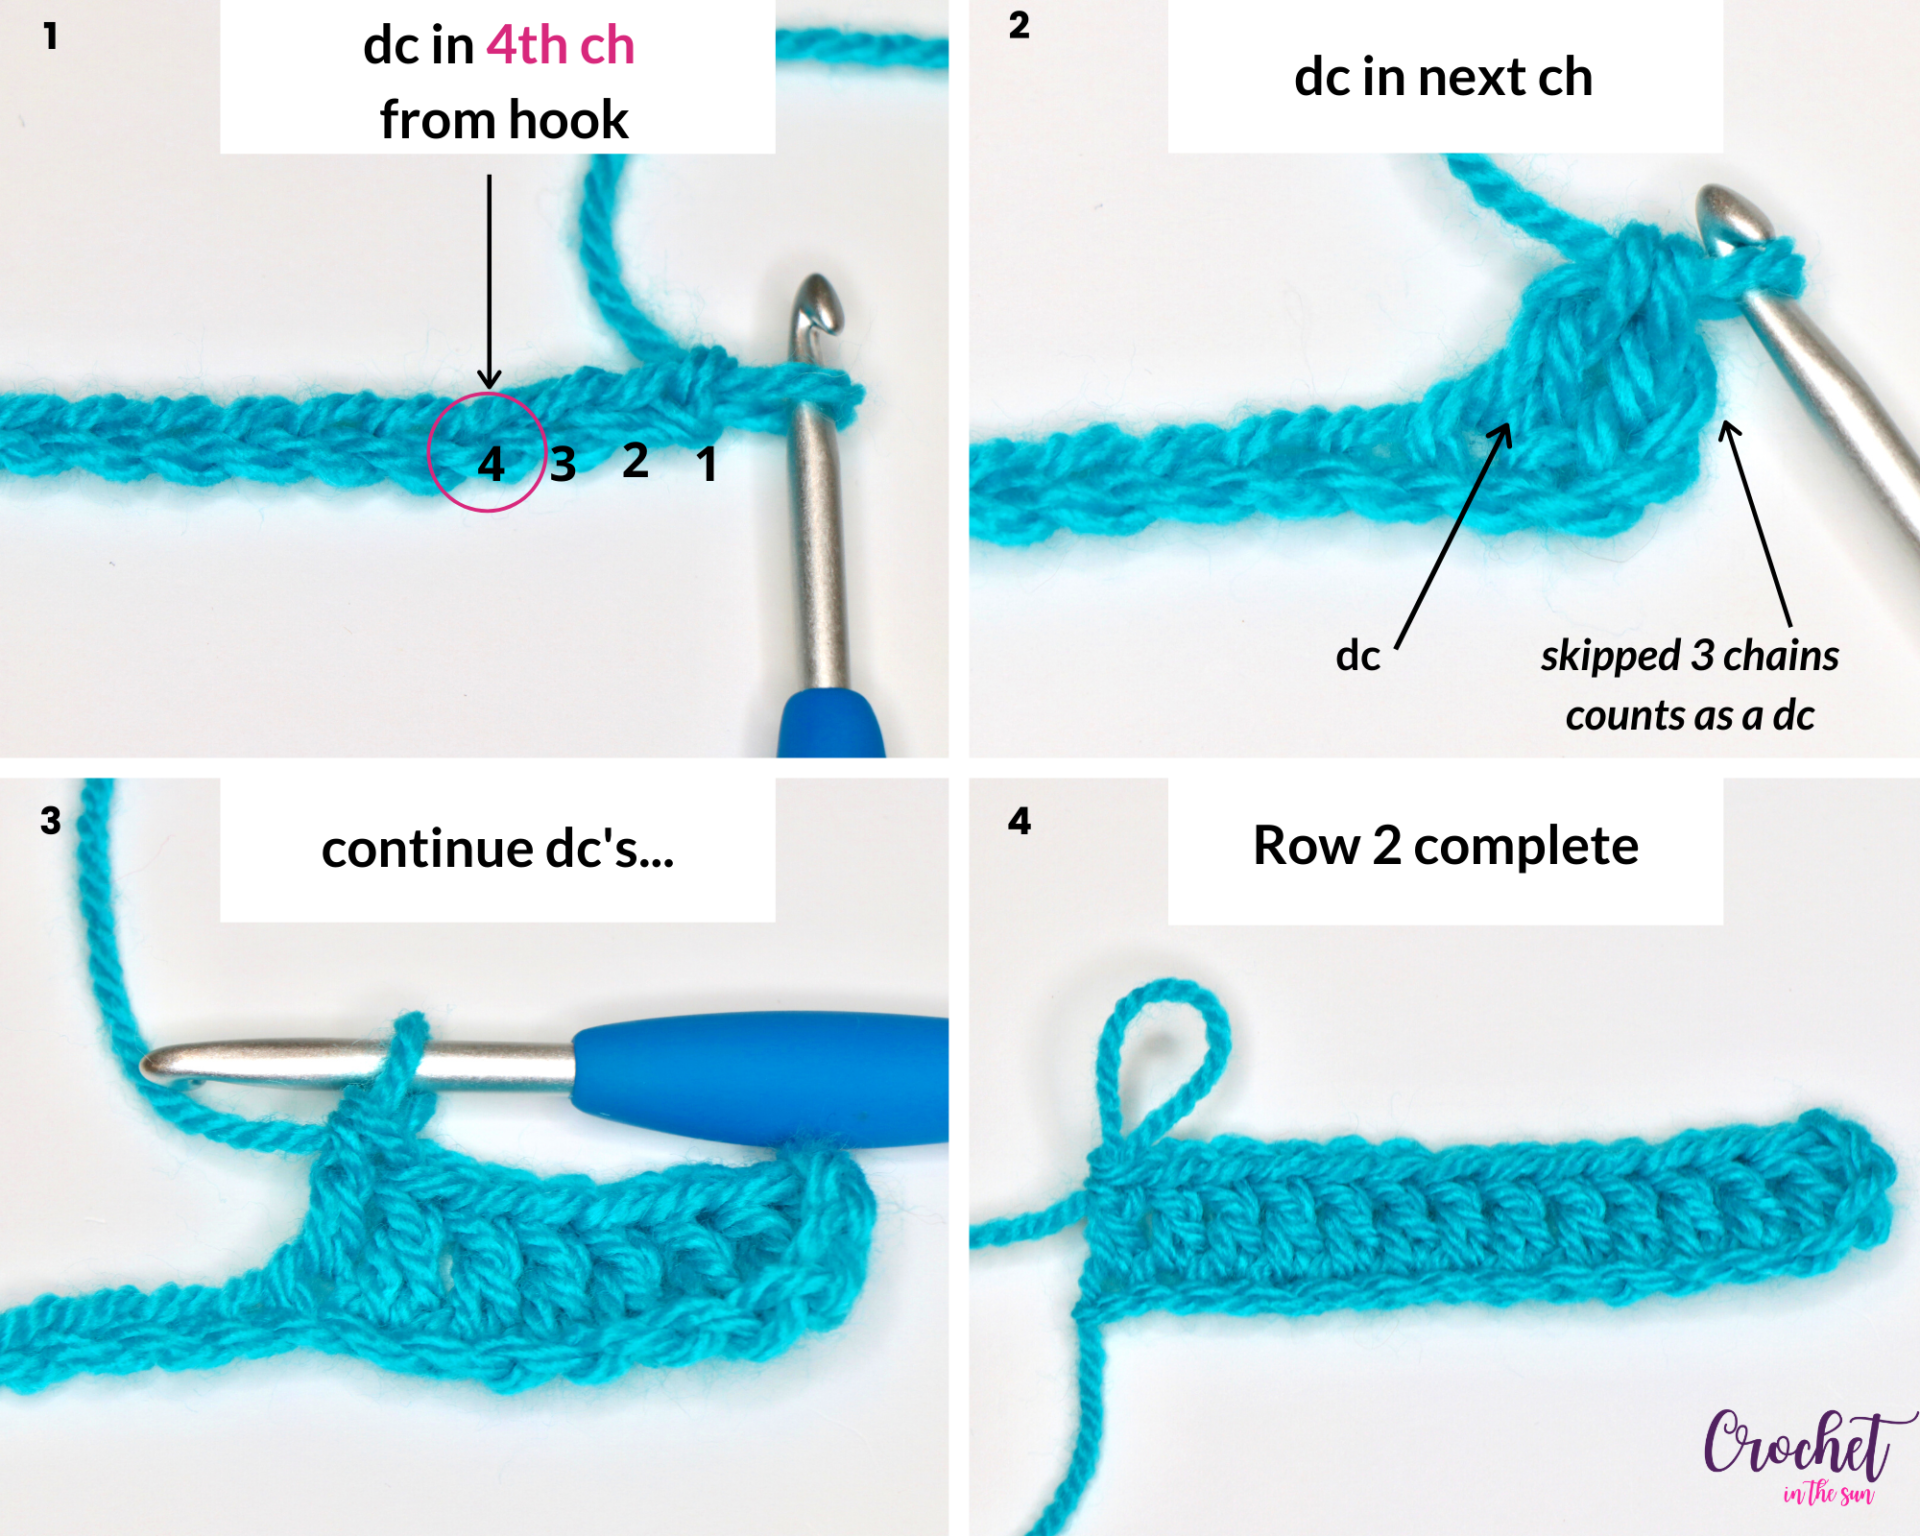 FREE and easy crochet project. This features my 'Open Windows' stitch which is an easy stitch repeat, and works up to be so beautiful! This is the progress after Row 2 Beginner friendly and free crochet pattern!